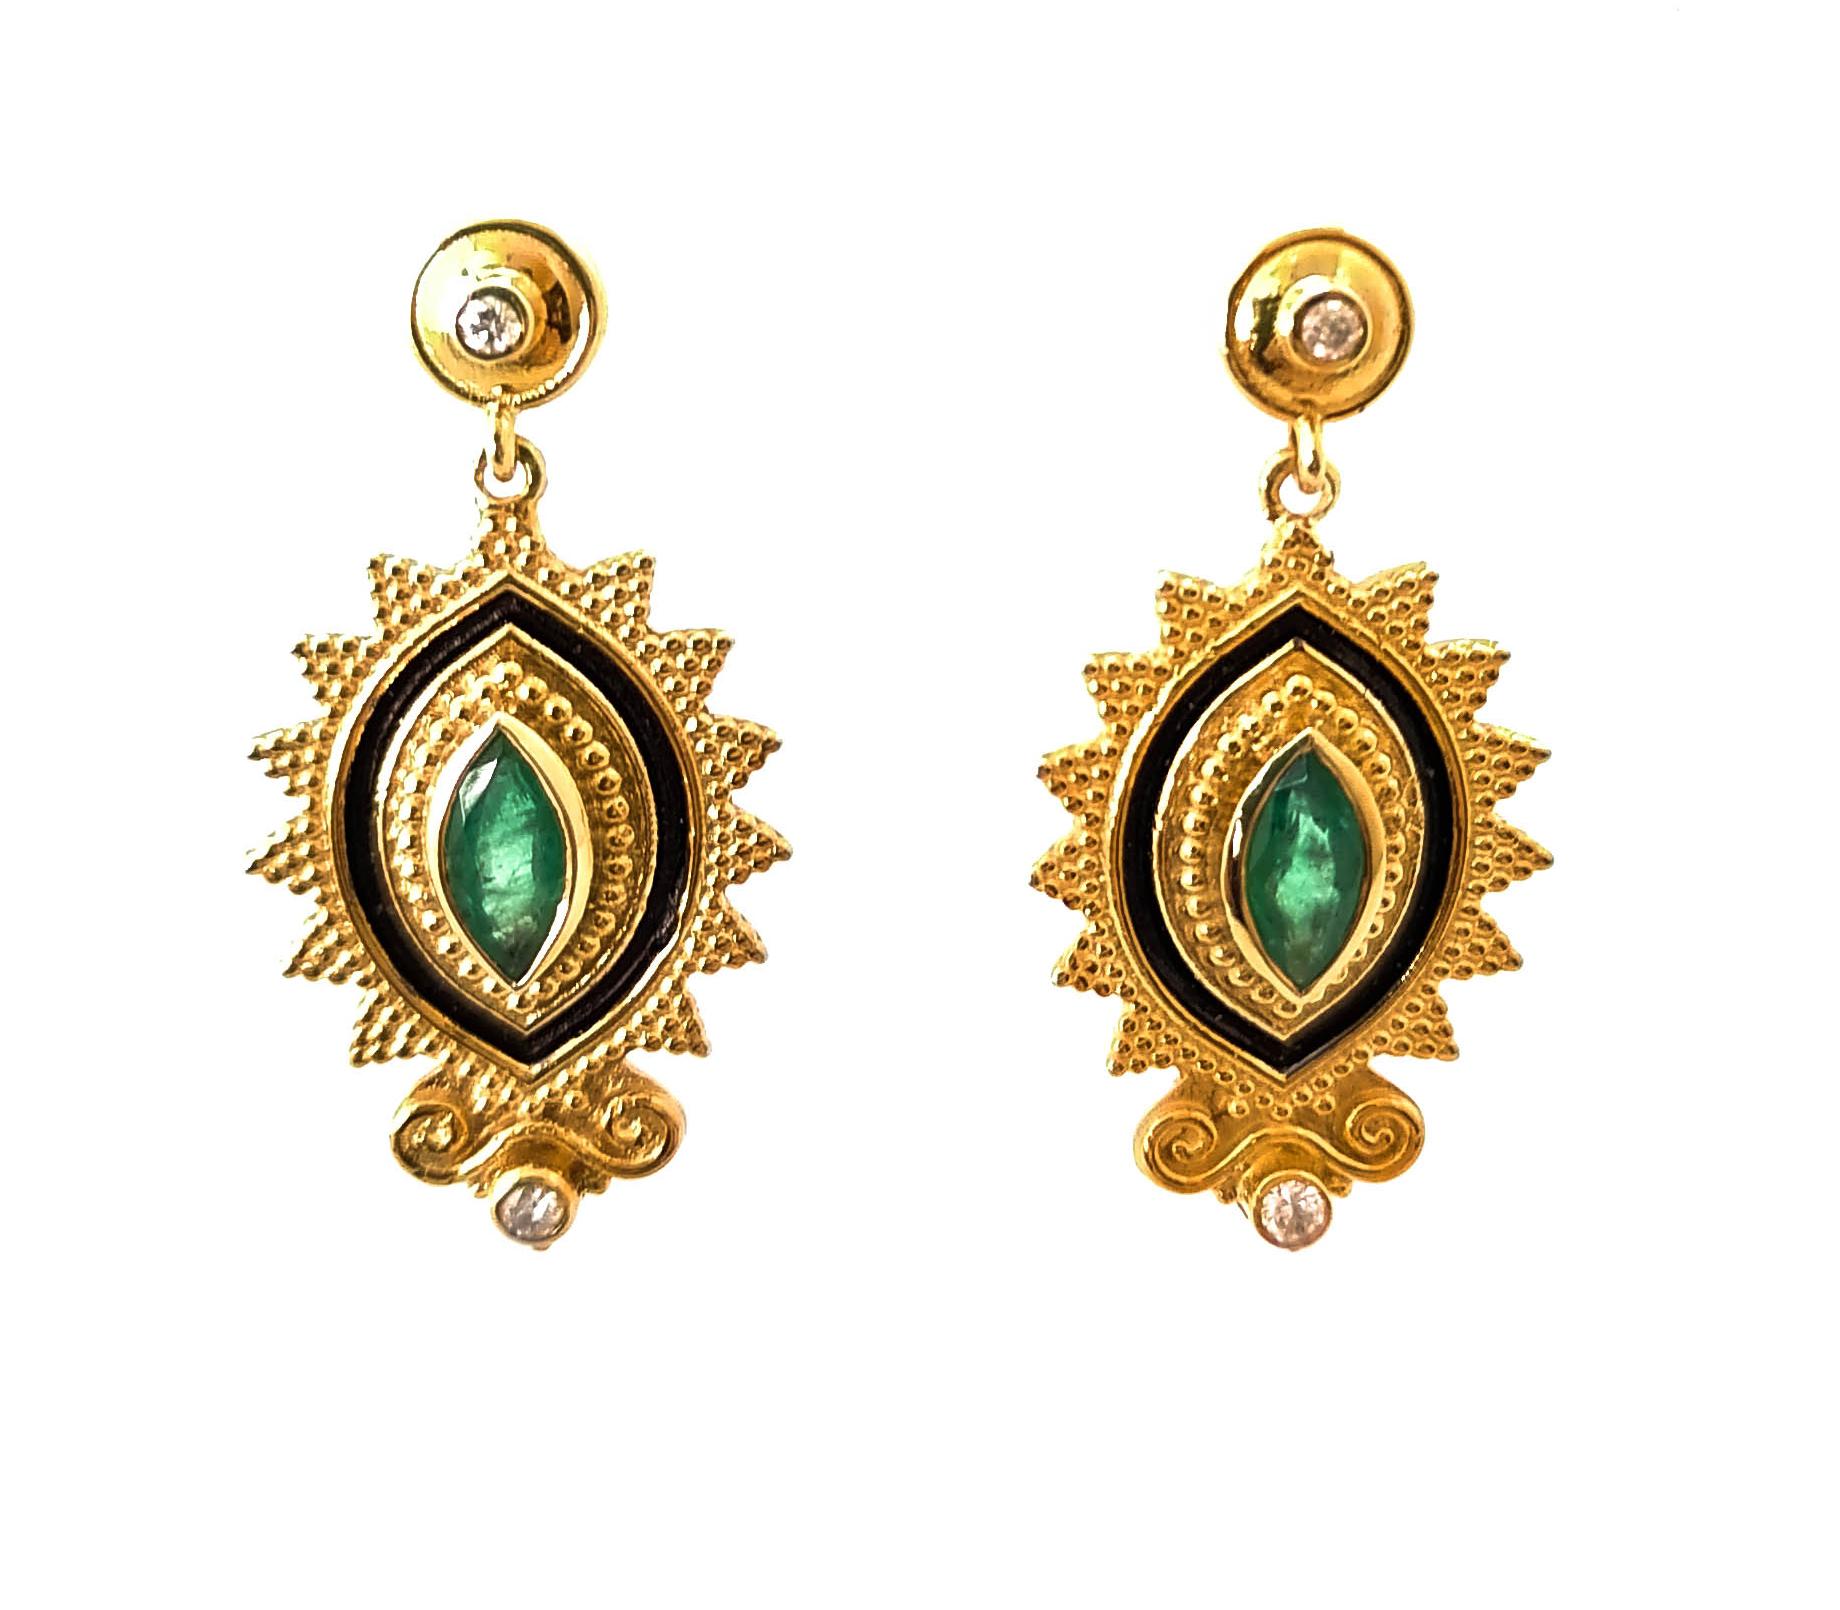 These S.Georgios designer 18 Karat Yellow Gold gorgeous earrings are decorated with hand-made Byzantine-era style bead granulation workmanship done microscopically and finished with a unique velvet background and Black Rhodium giving them a stunning